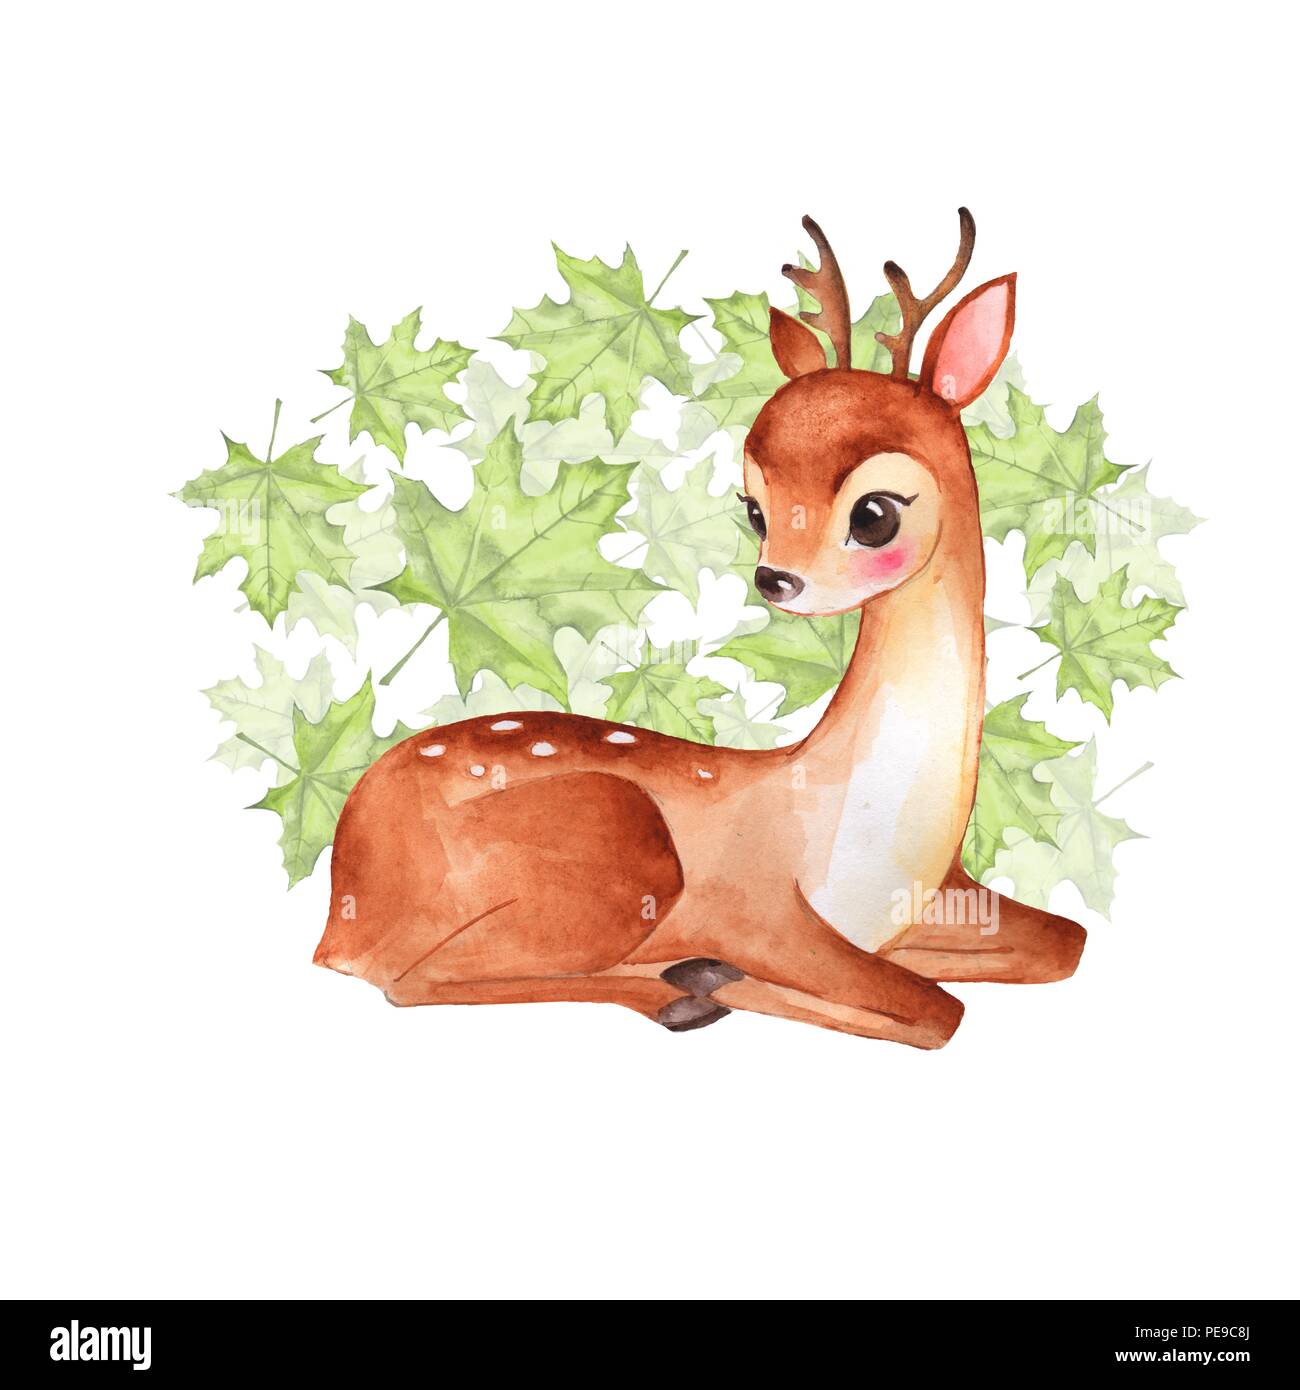 Baby Deer. Cute fawn. Watercolor illustration Stock Photo - Alamy